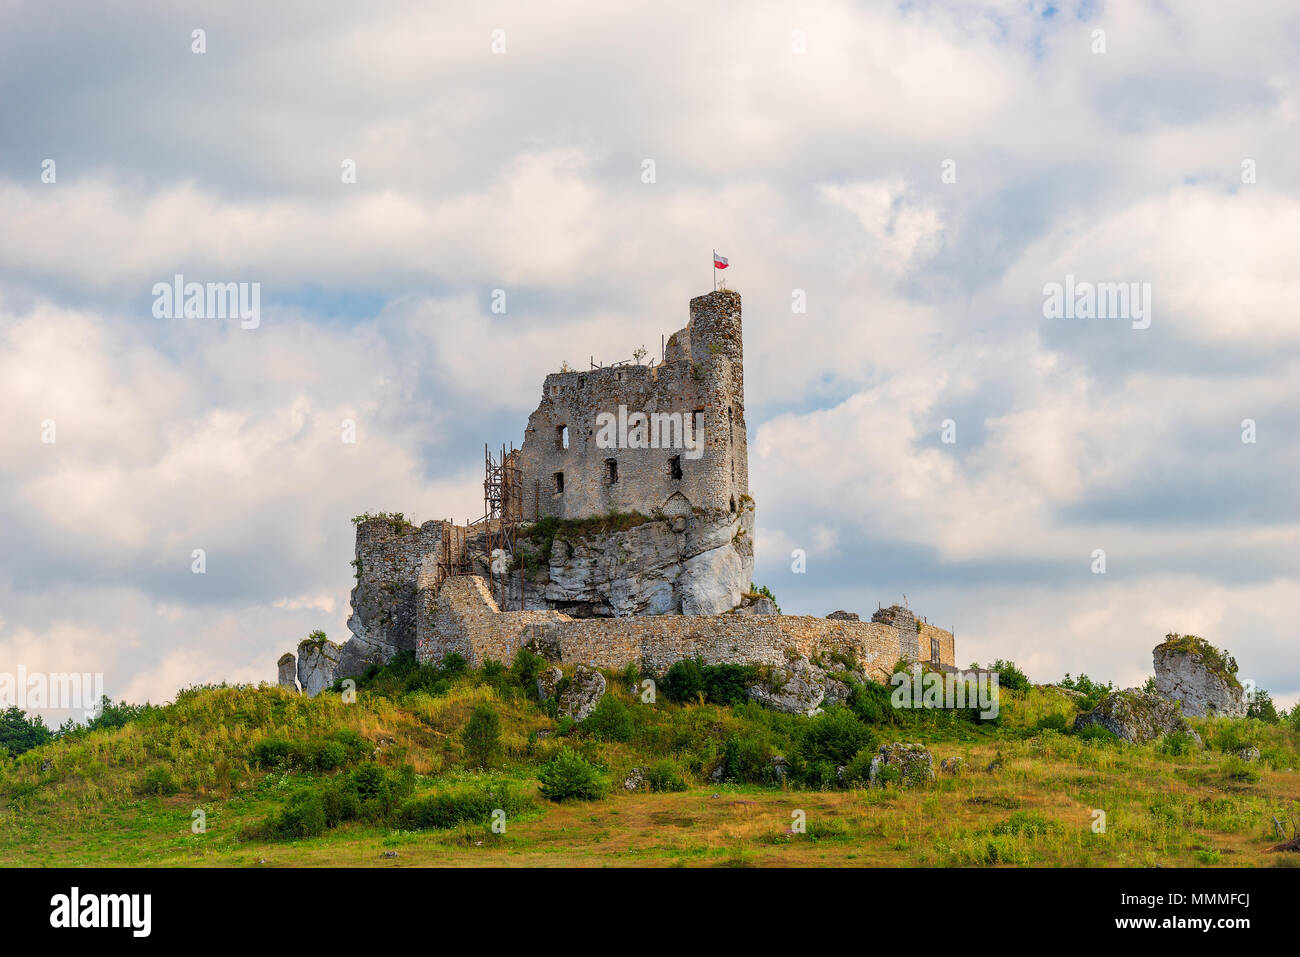 view of the beautiful ruined castle in Mirow, Poland Stock Photo